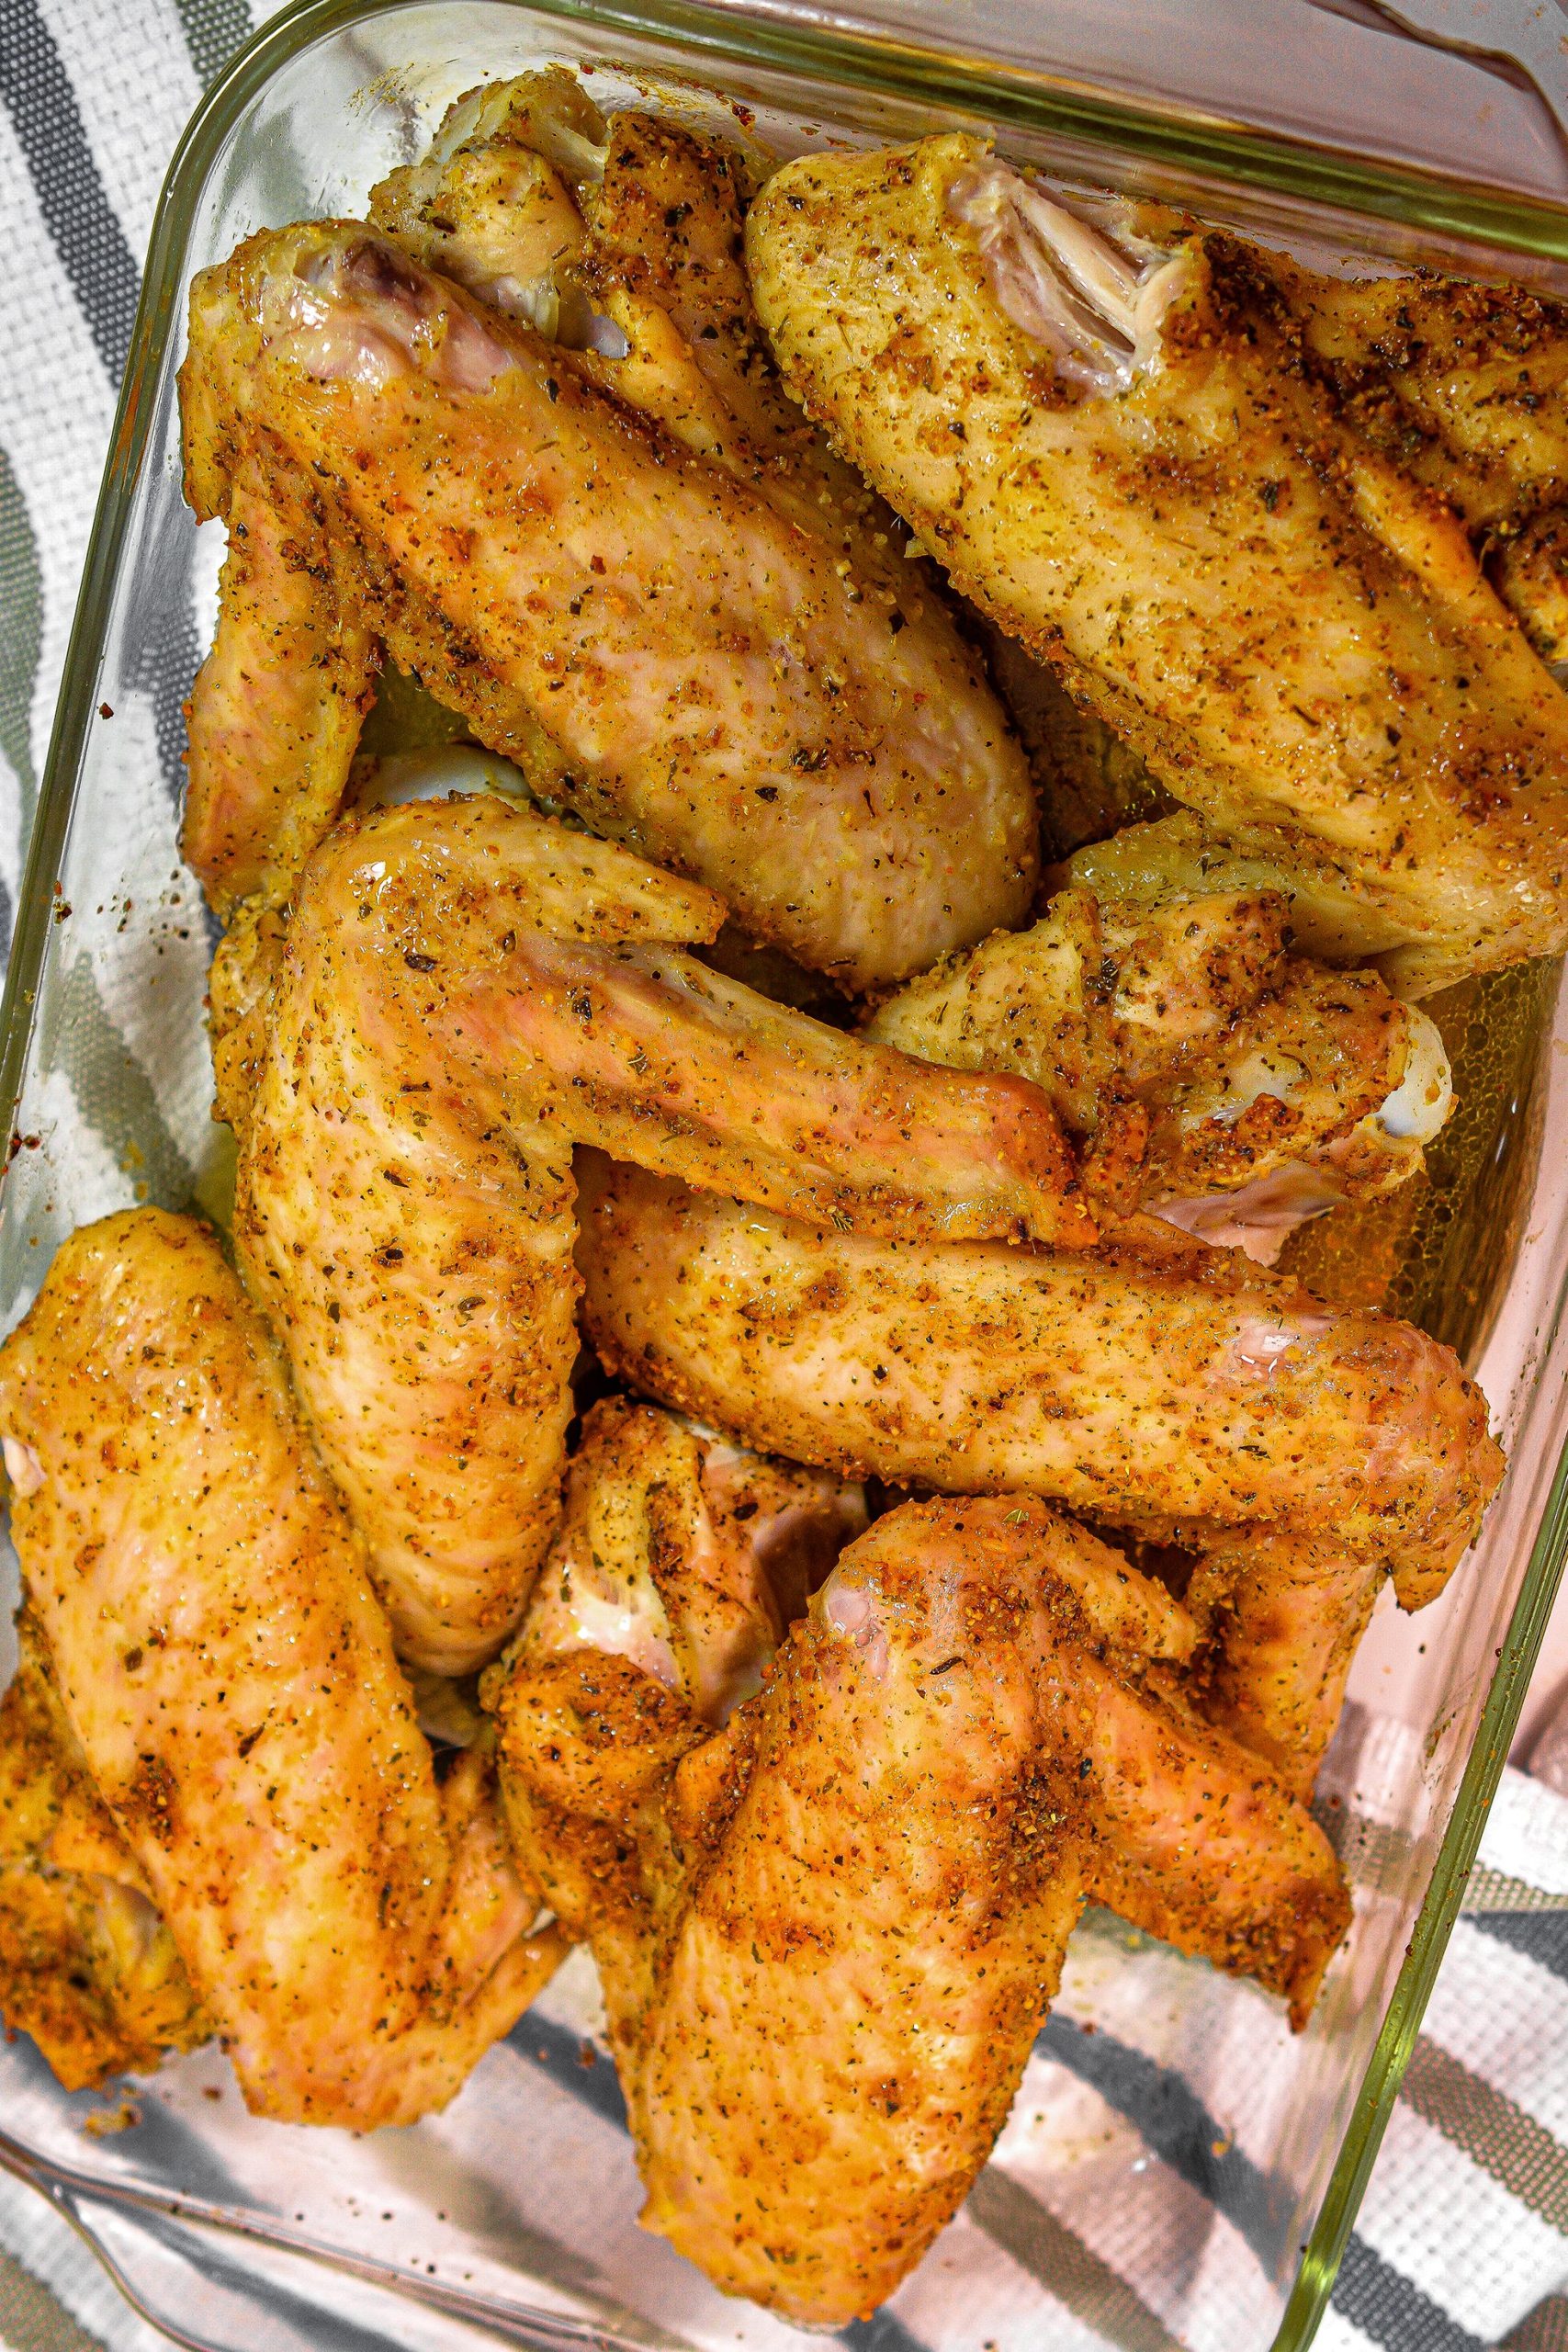 Bake for 30 minutes. Remove the foil, and bake for an additional 30 minutes, or until the wings reach an internal temperature of 165.